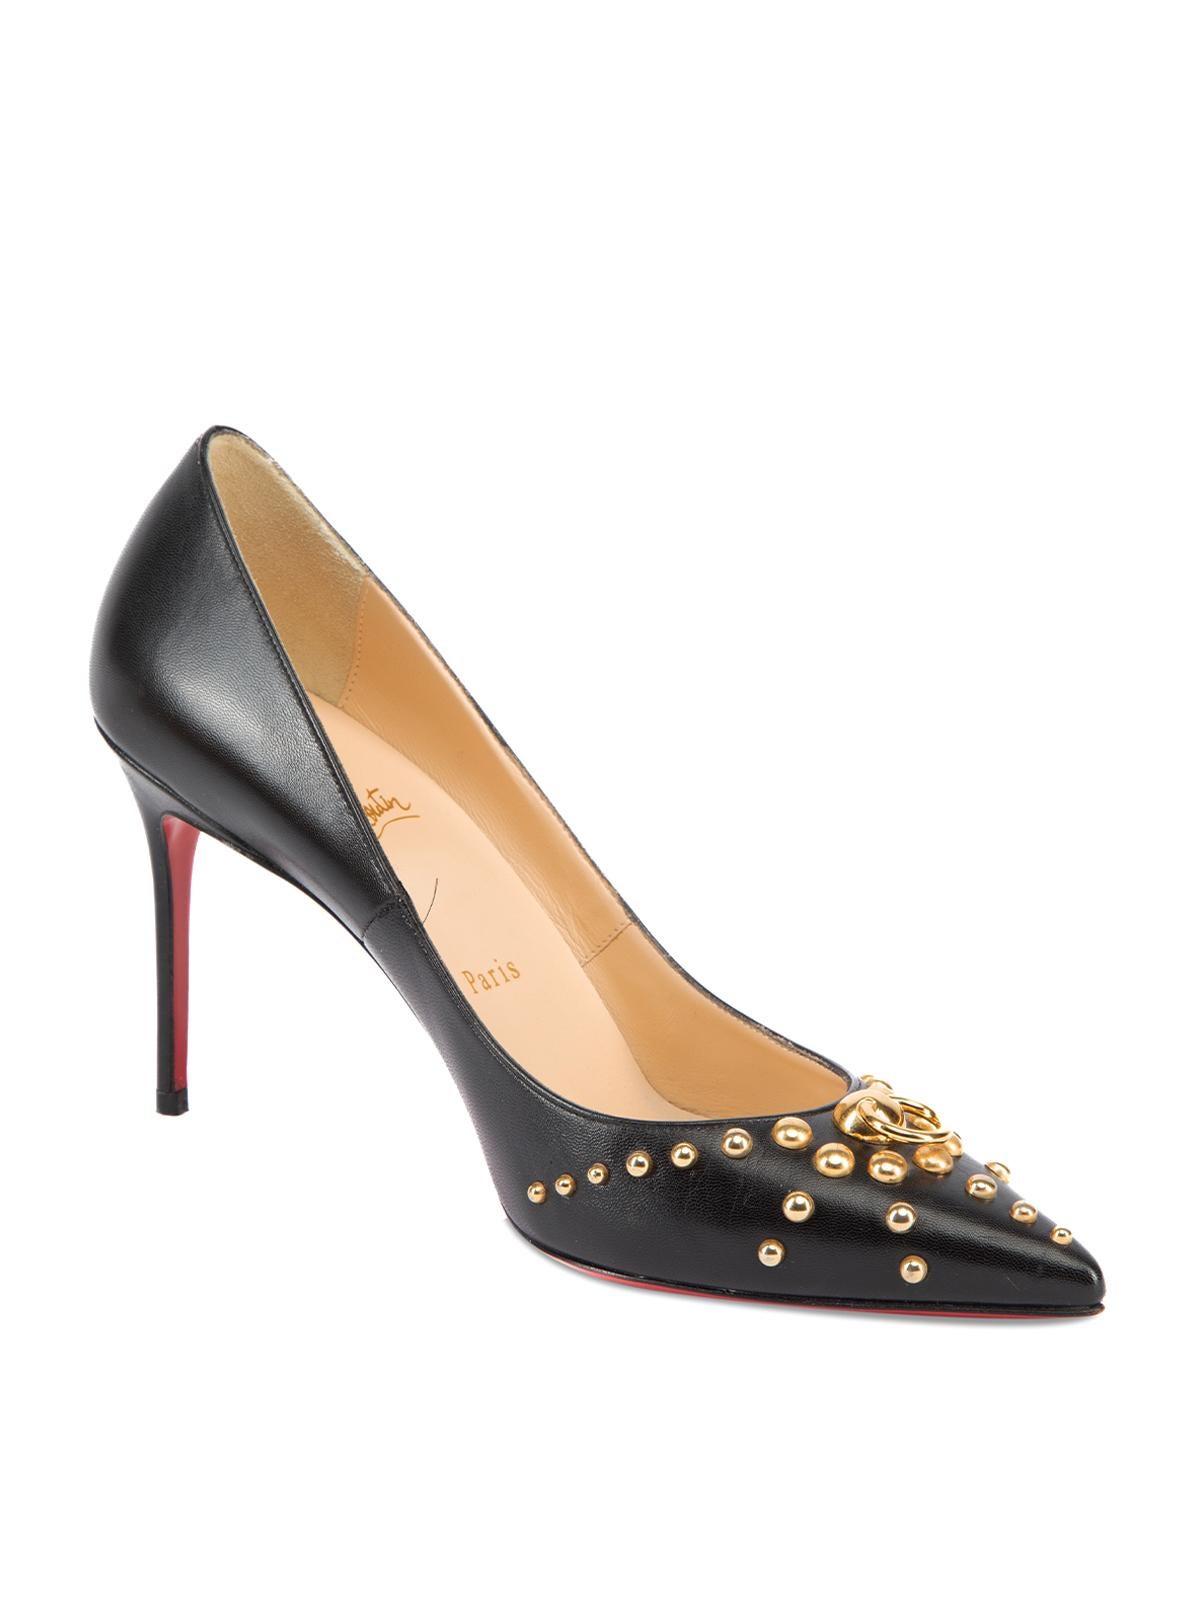 CONDITION is Very good. Minimal wear to shoes is evident on this used Christian Louboutin designer resale item. This item comes with box. Details Black Leather Slip on pumps Pointed toe Stiletto high heel Gold tone door knock and studs on toe cap